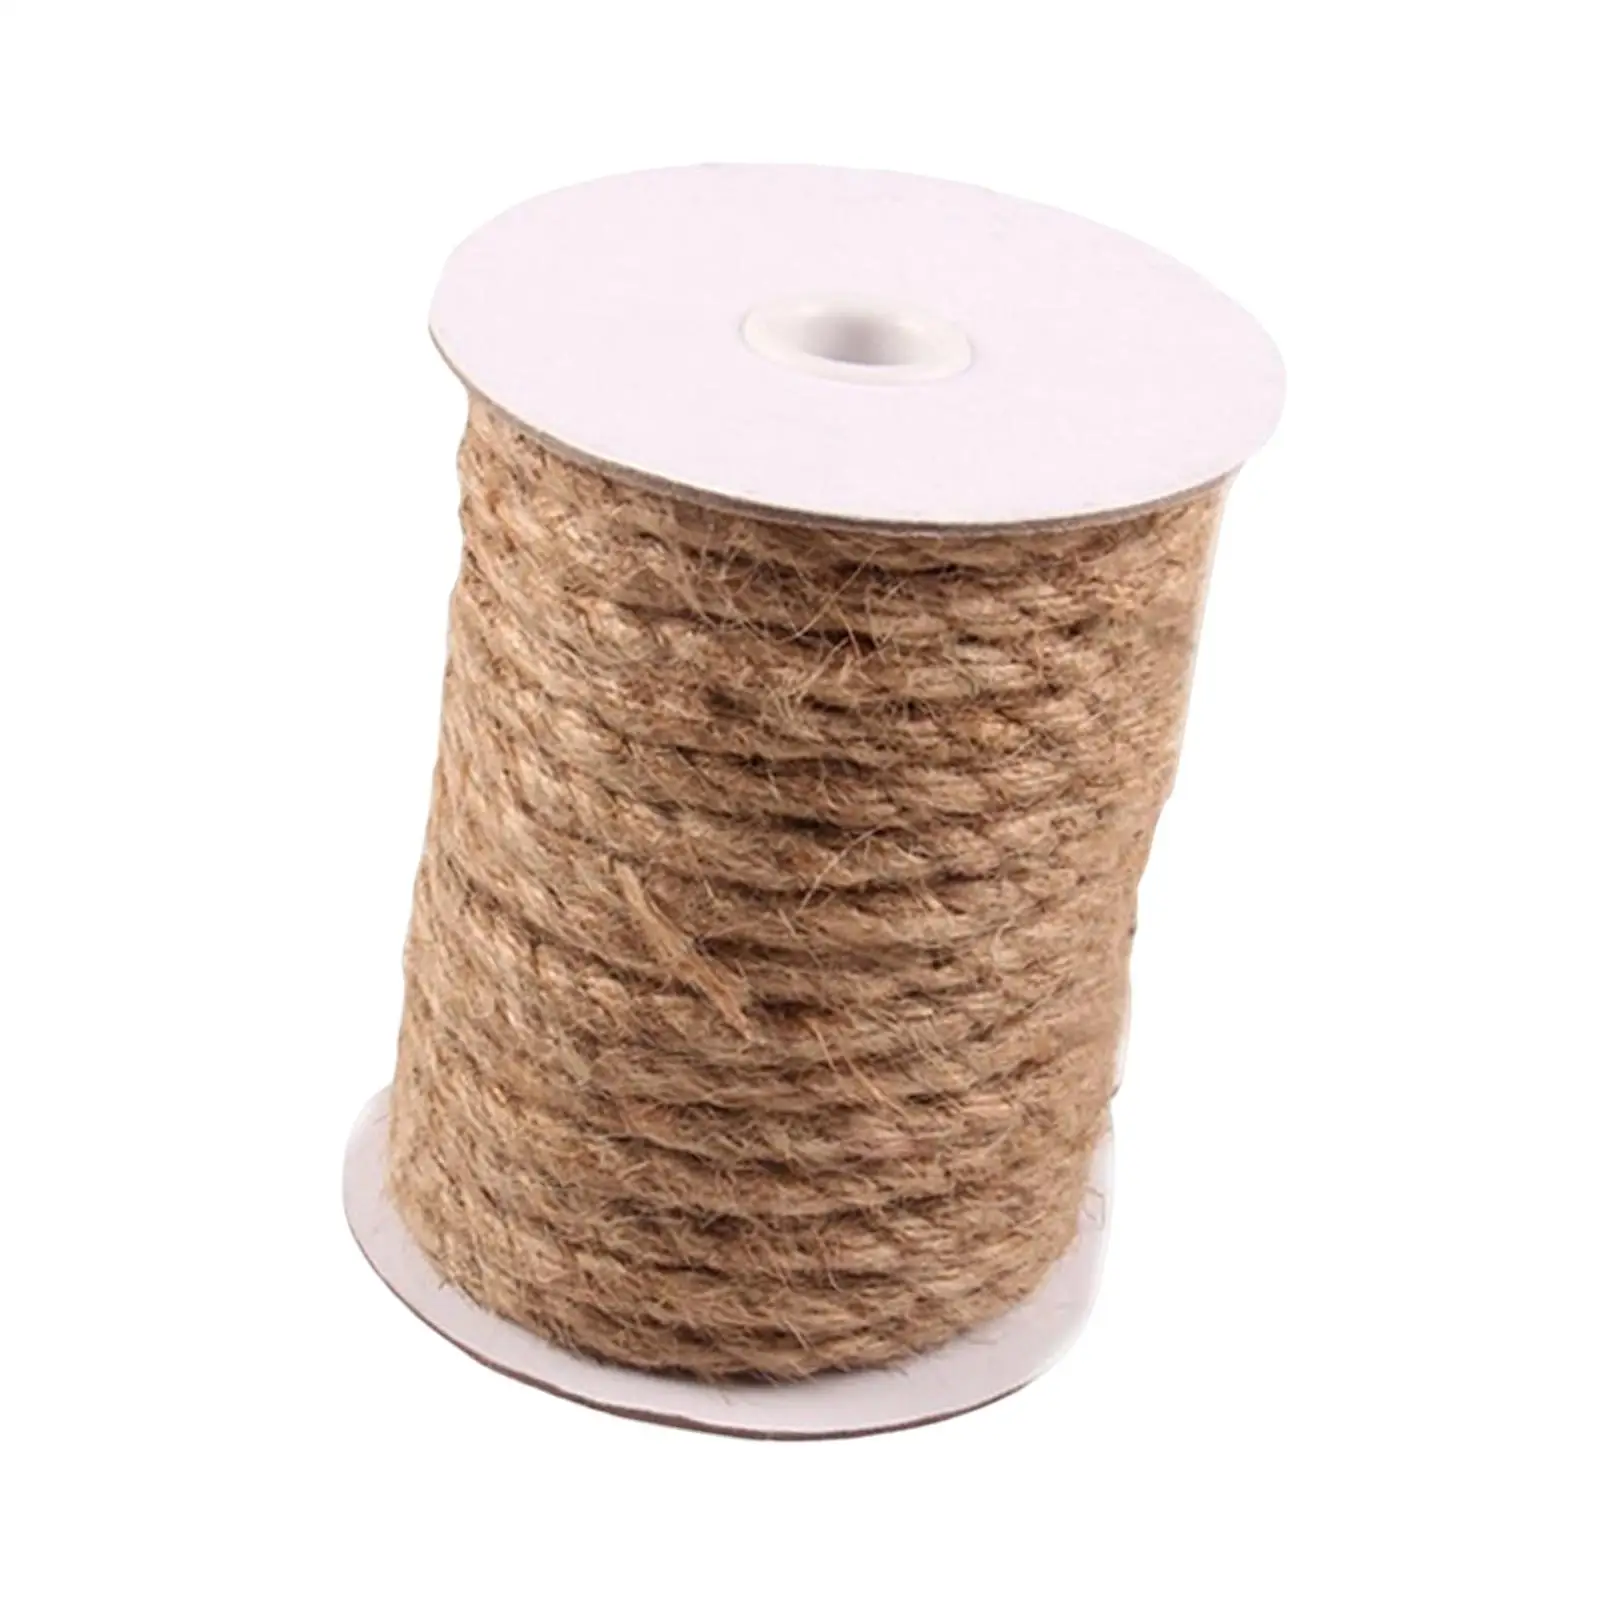 Twine Rope Weaving Rope Multipurpose Packing Cords Hemp Rope for Pet Toys Decorative Accents Macrame DIY Projects